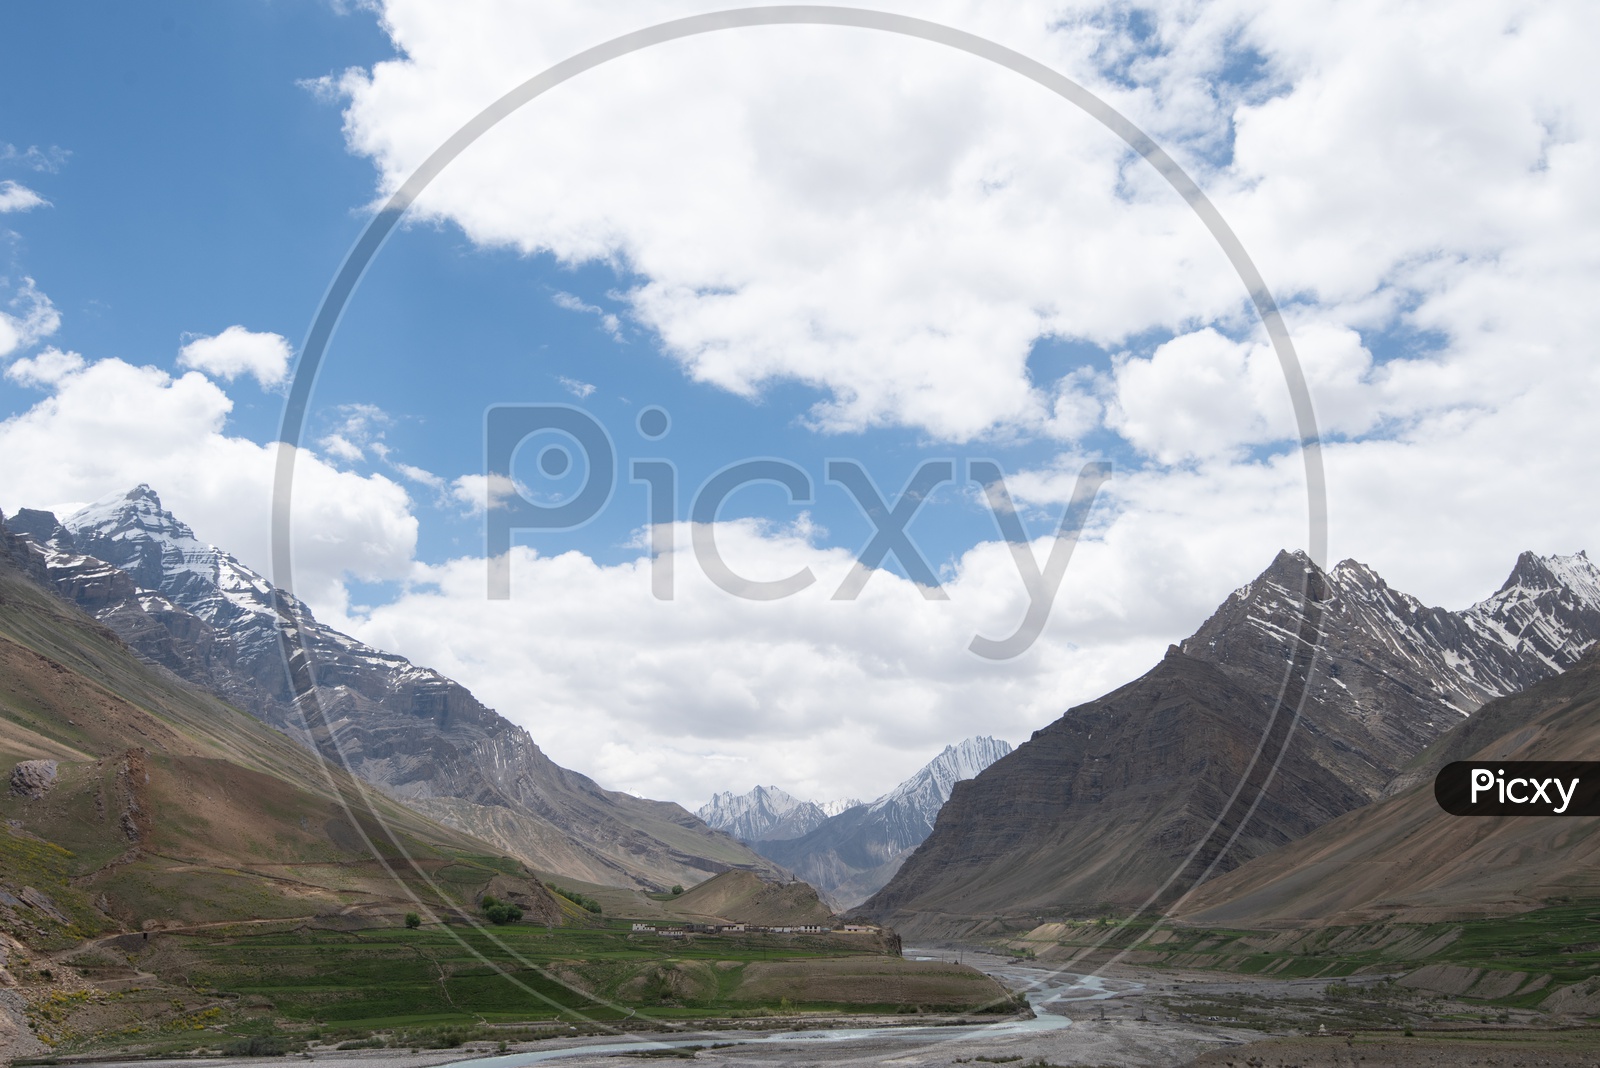 A River Valley View  From Village Hill Top in Leh / Ladakh